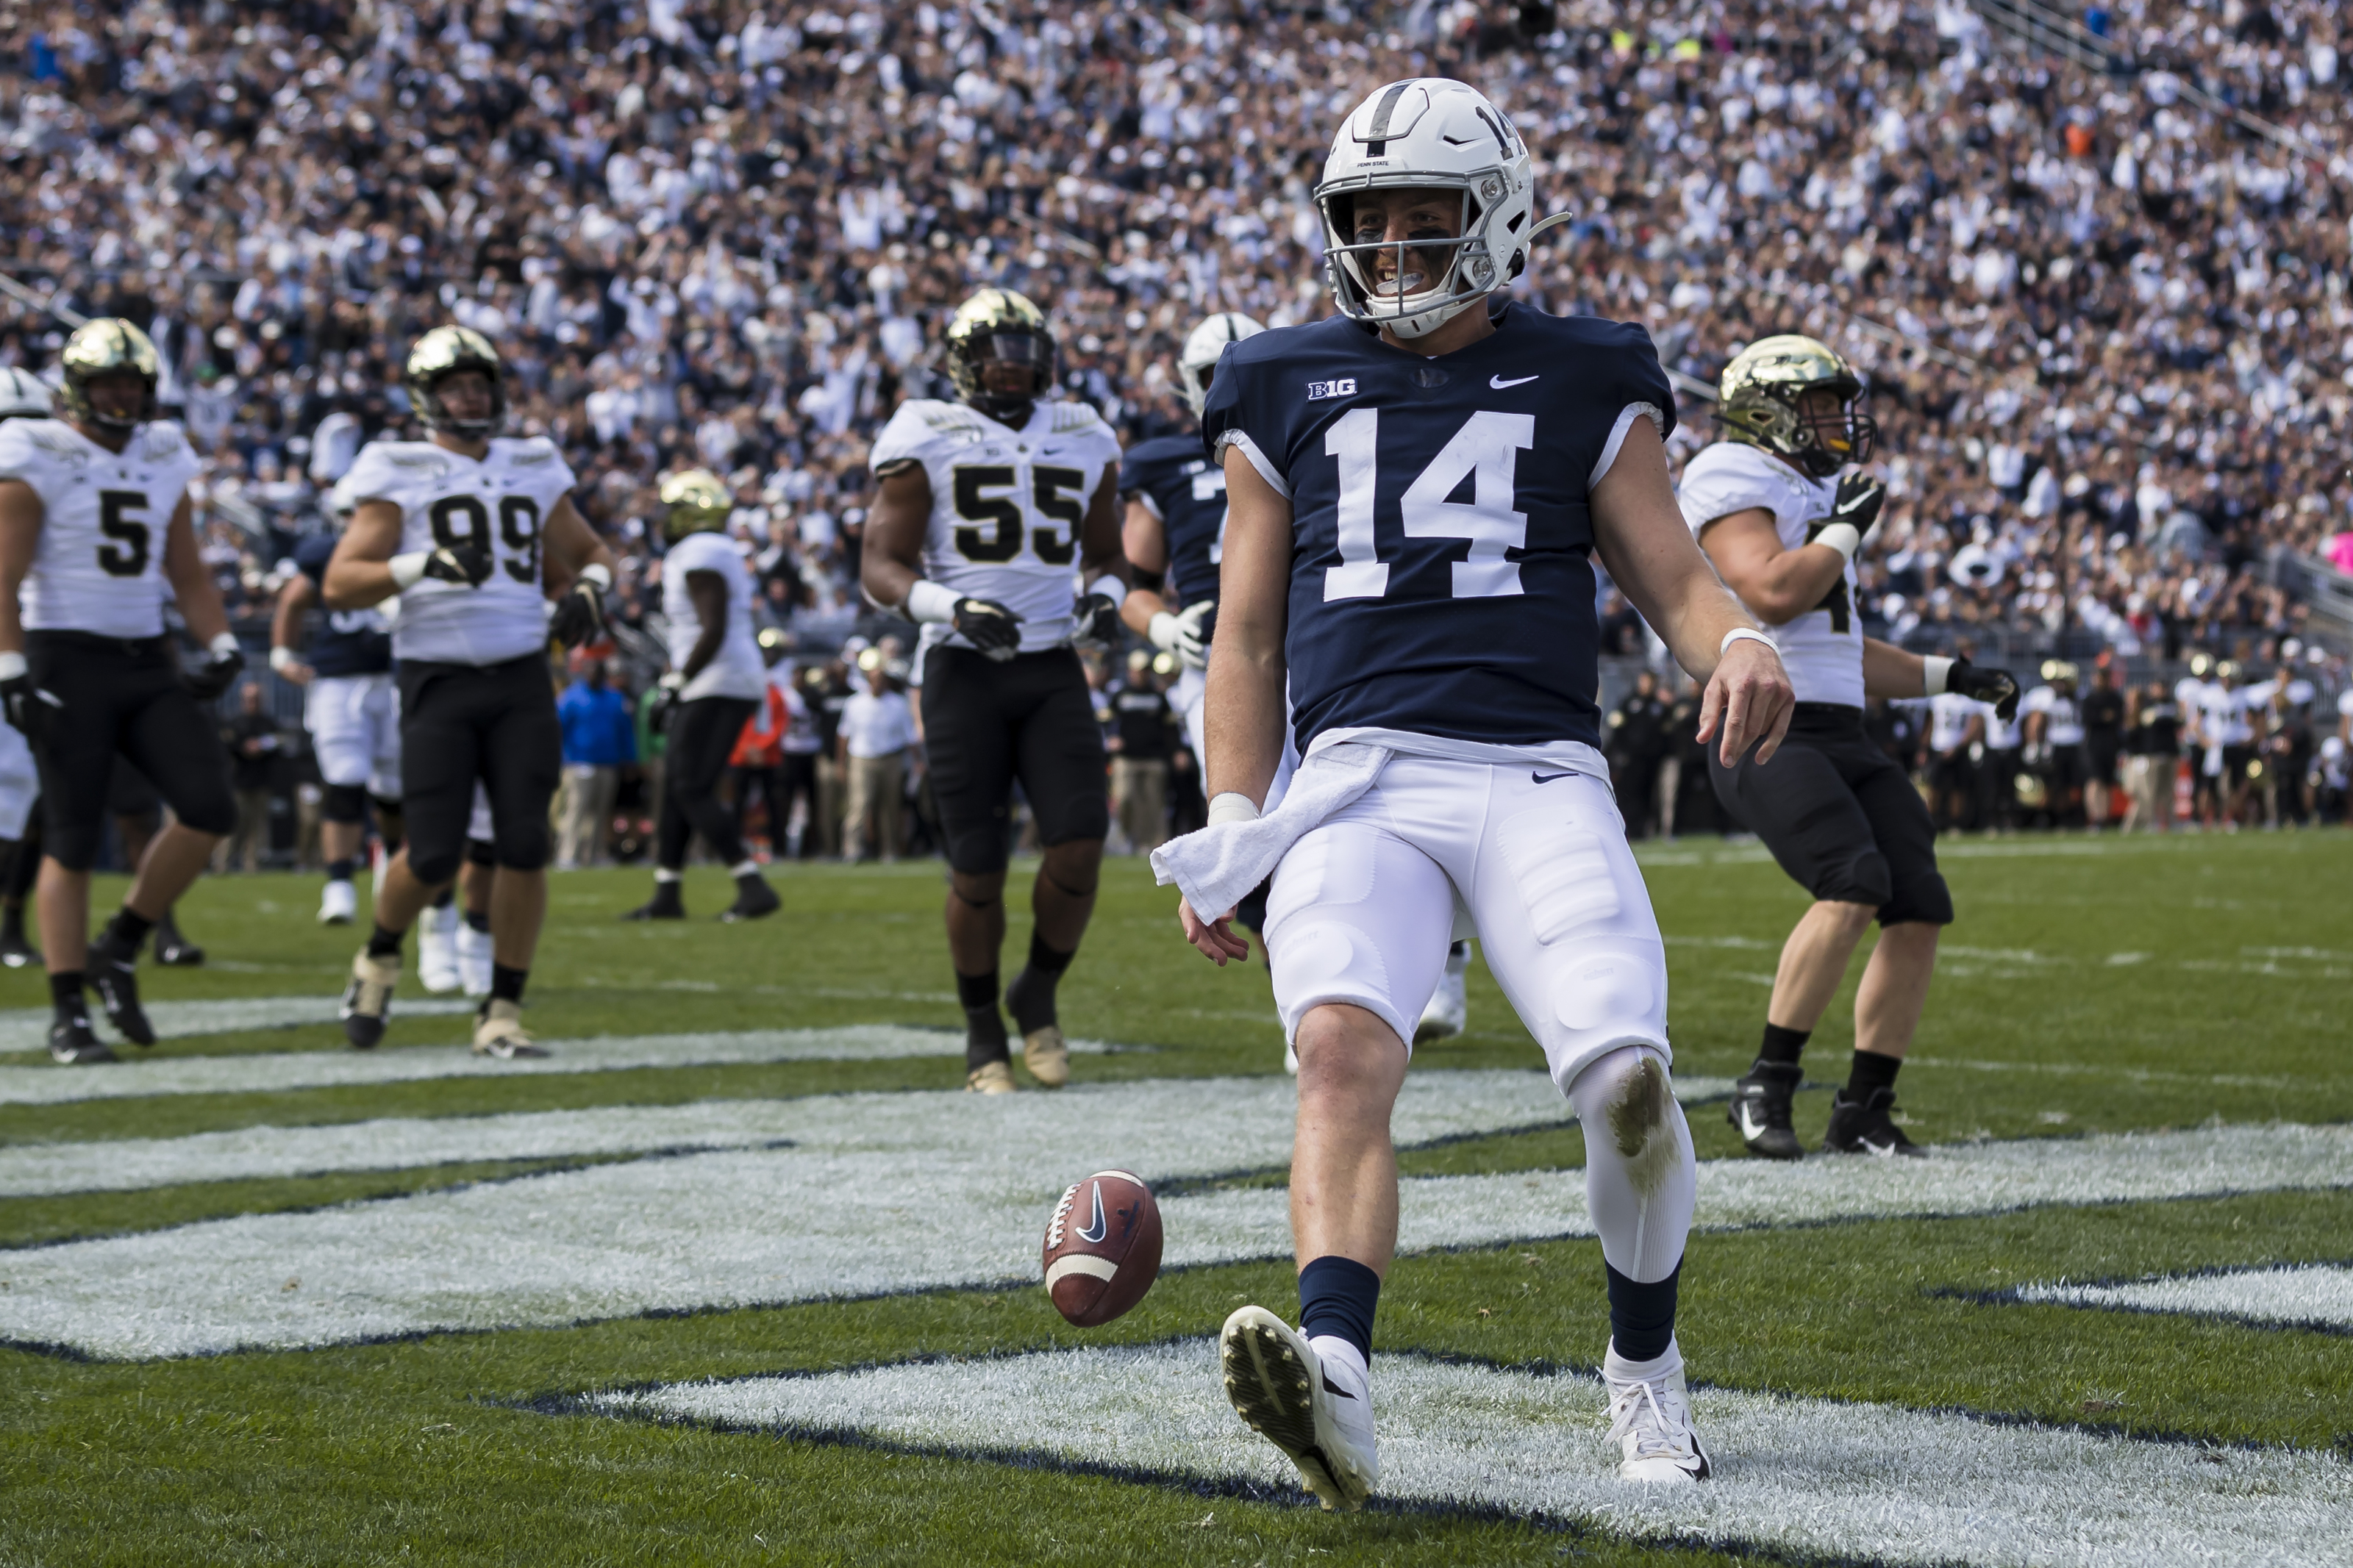 Three reasons why Penn State Football matches up well with Purdue